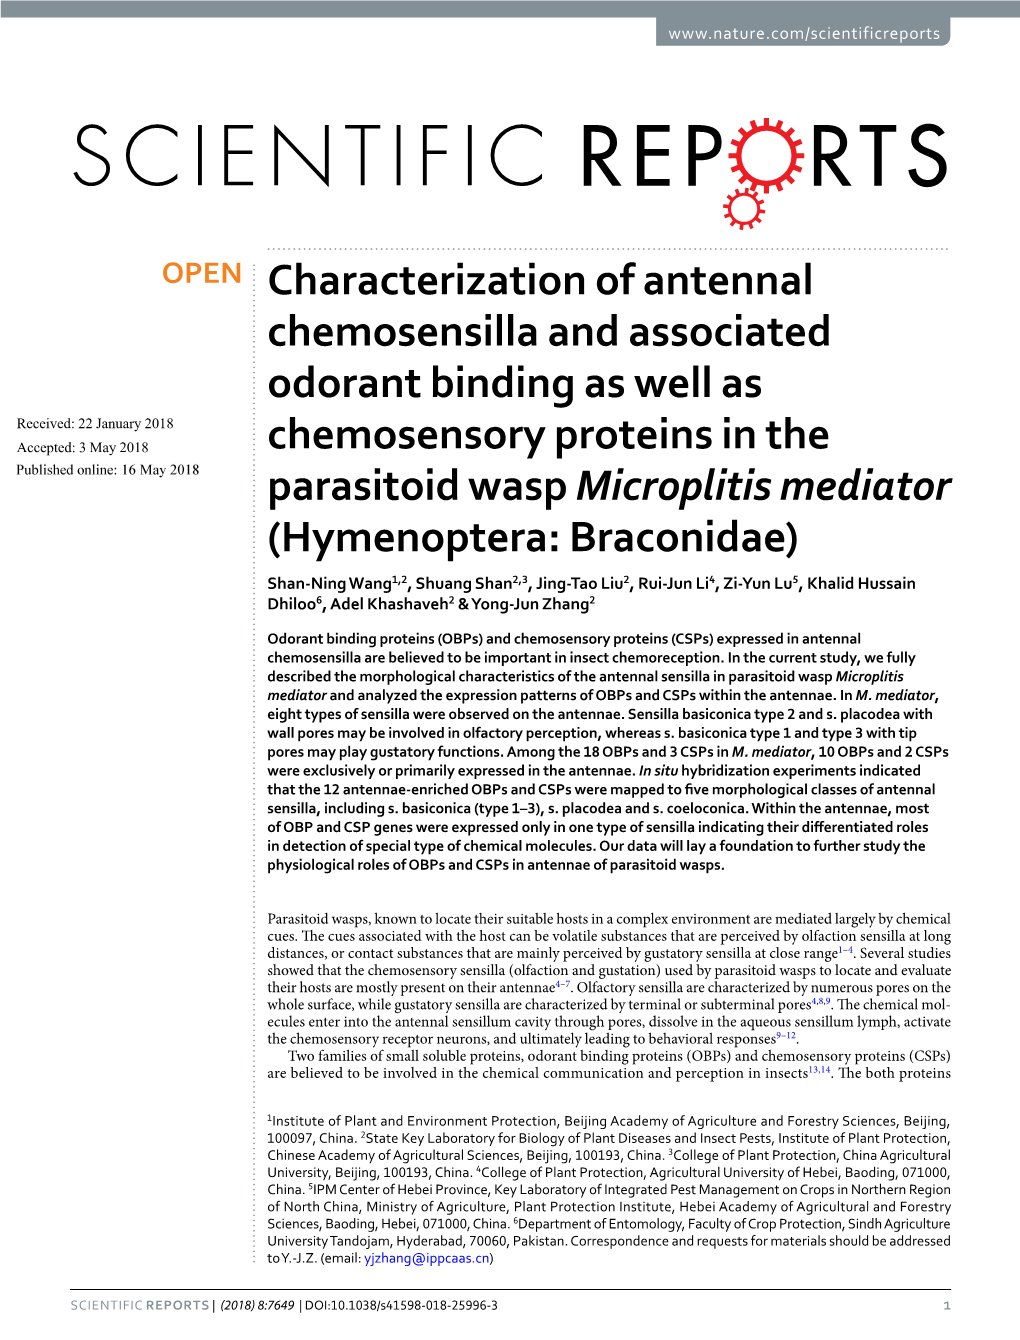 Characterization of Antennal Chemosensilla and Associated Odorant Binding As Well As Chemosensory Proteins in the Parasitoid